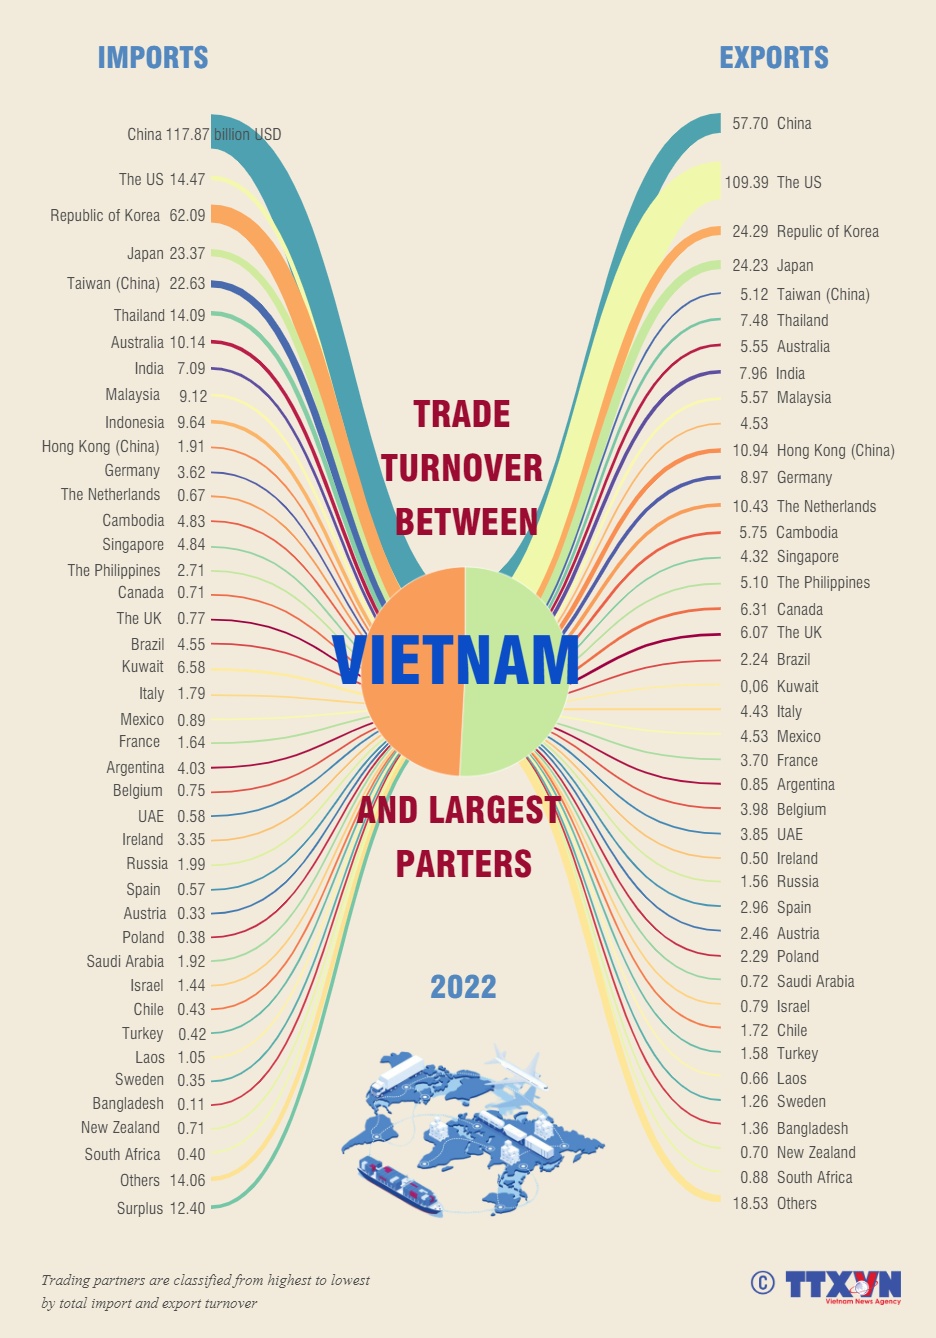 Vietnam's trade with largest partners in 2022